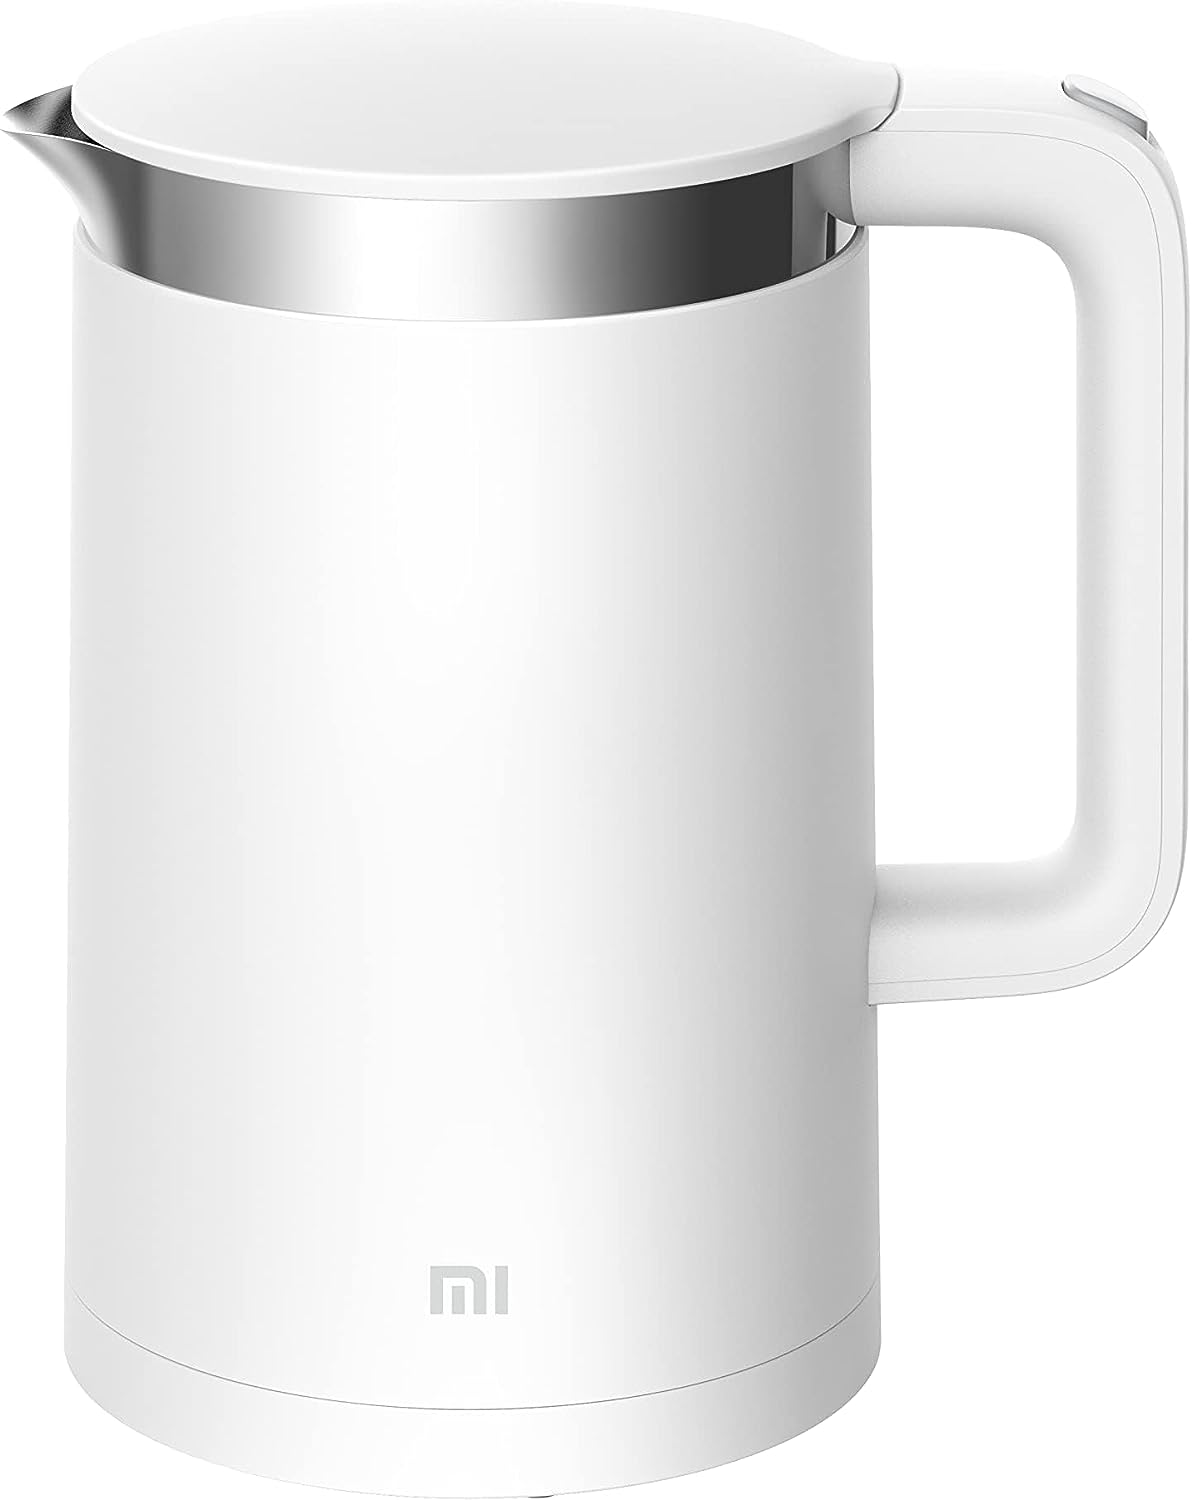 Xiaomi Mi Smart Electric Kettle Pro Water Boiler With Mobile App Control | 1.5L Capacity Bluetooth 4.0 Stainless Steel